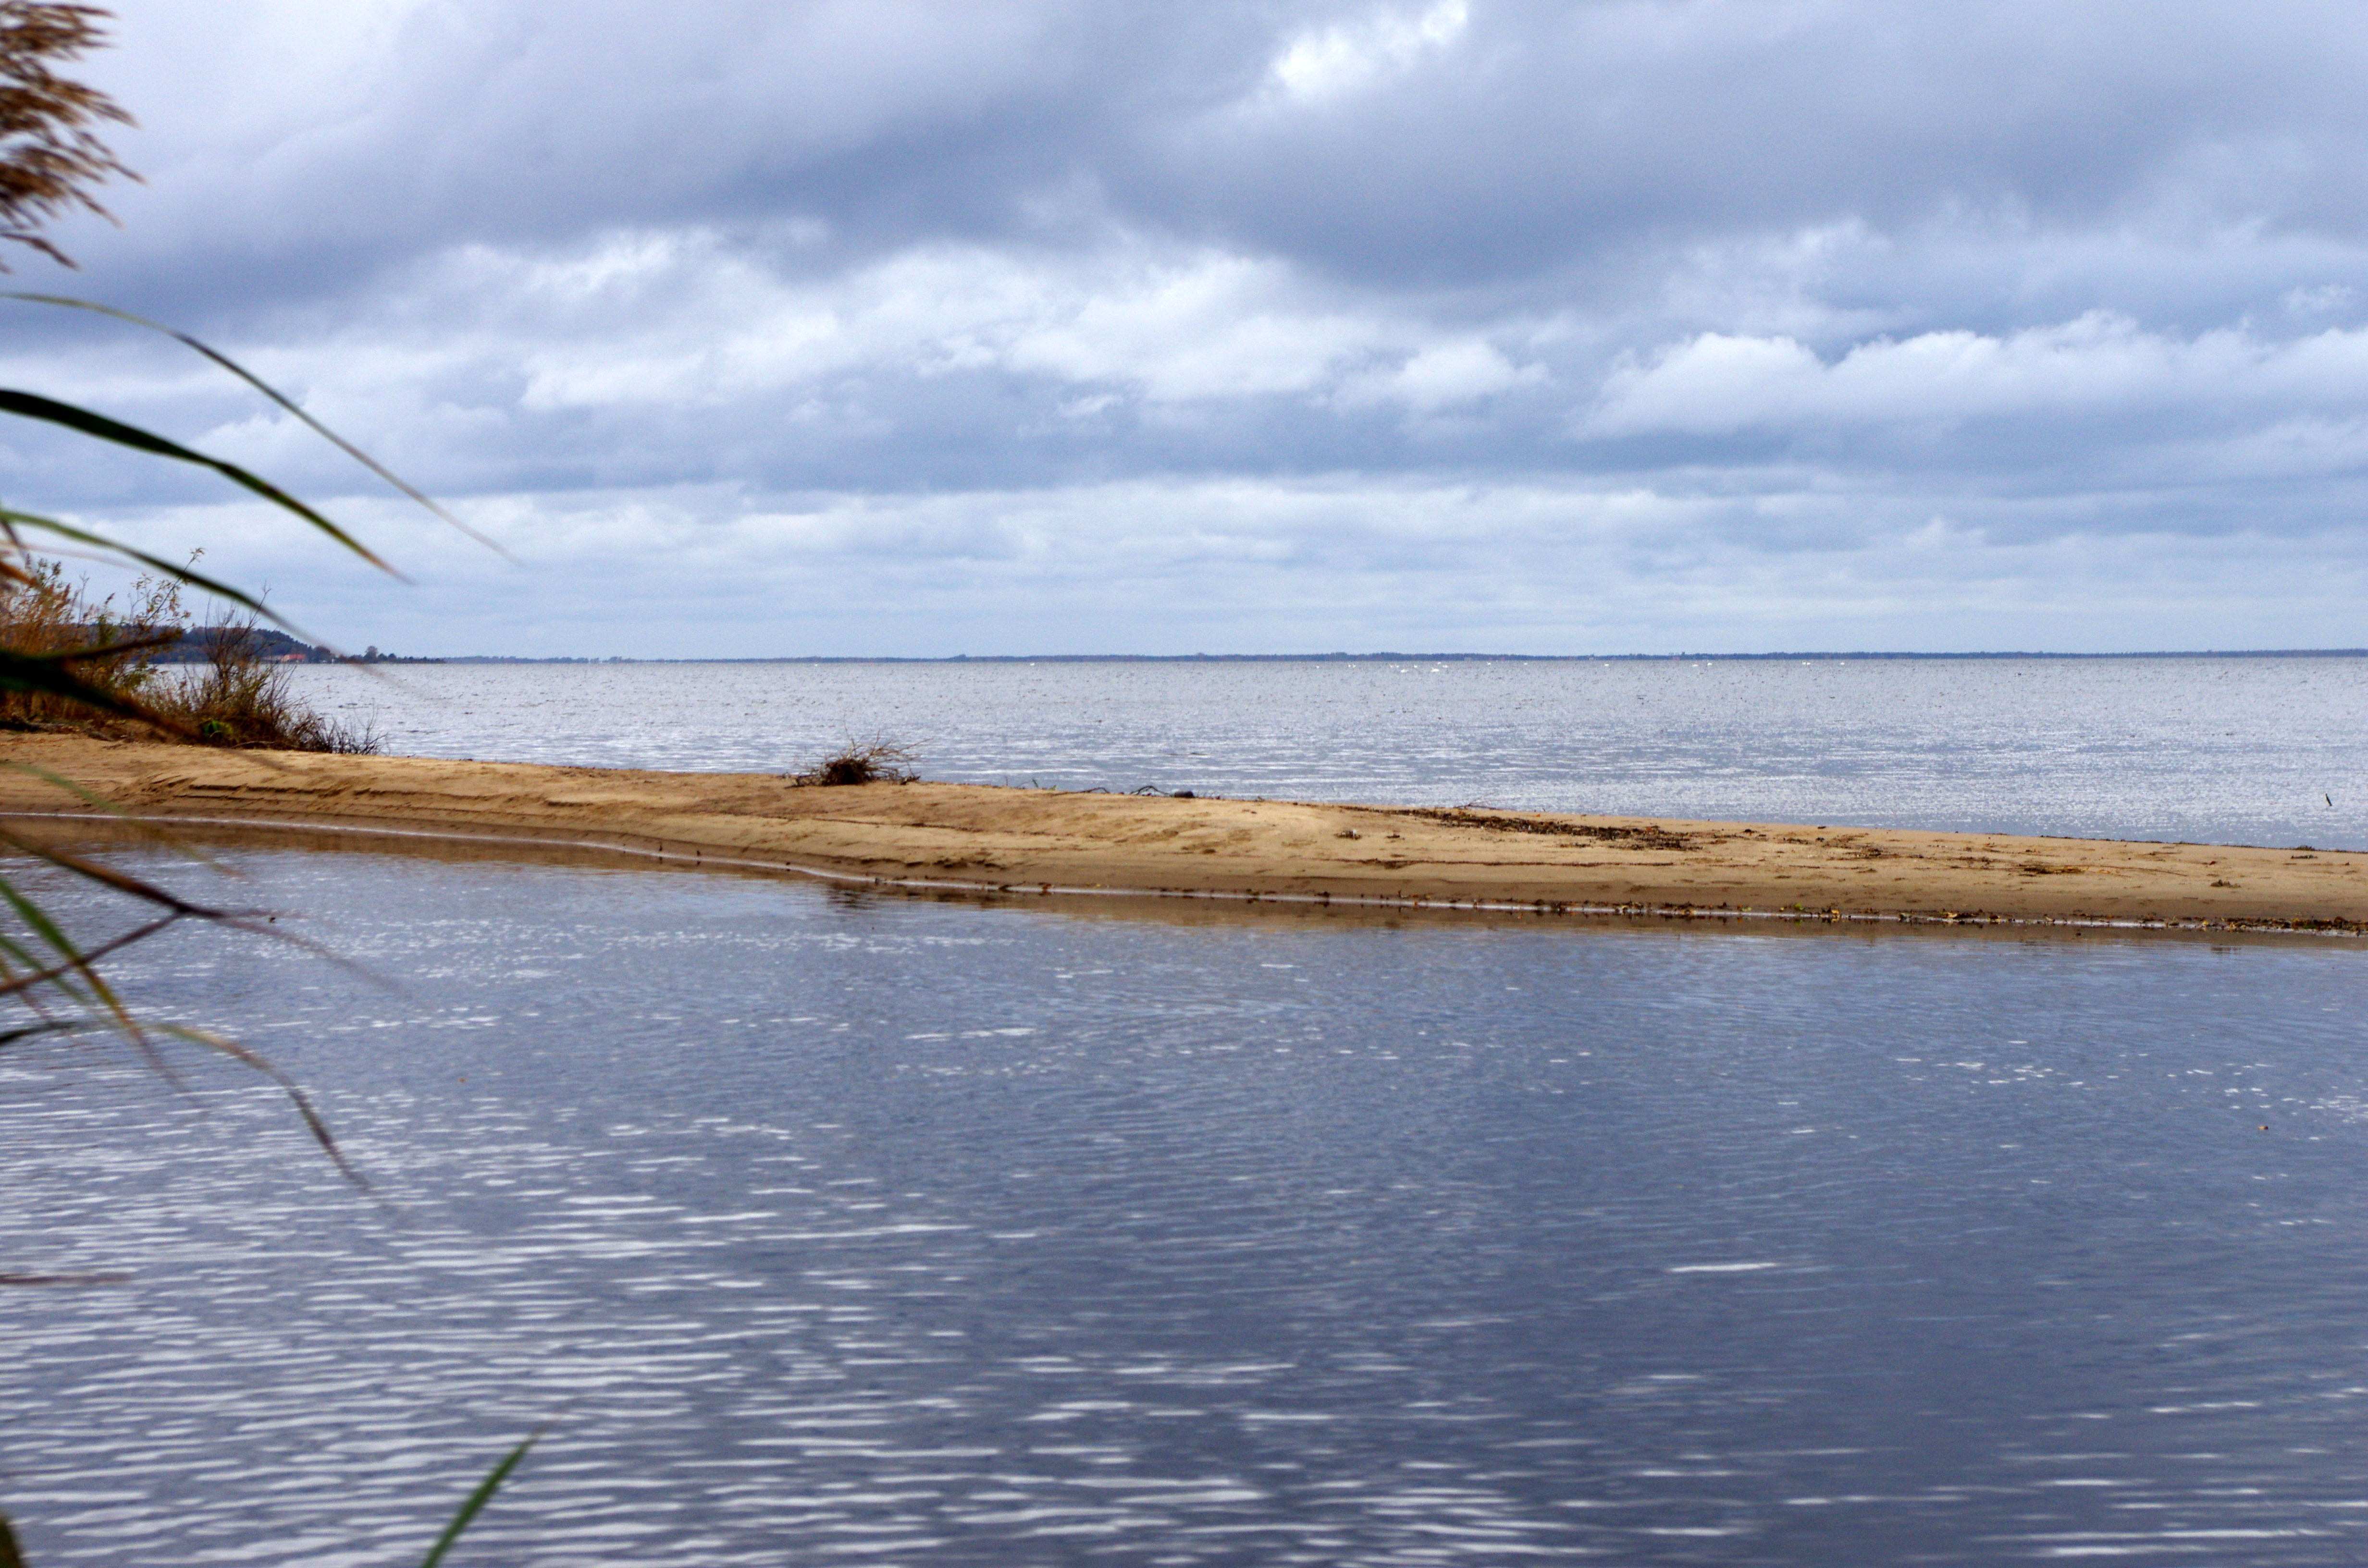 The photo shows sandbar at the mouth of the river to the Baltic Reda